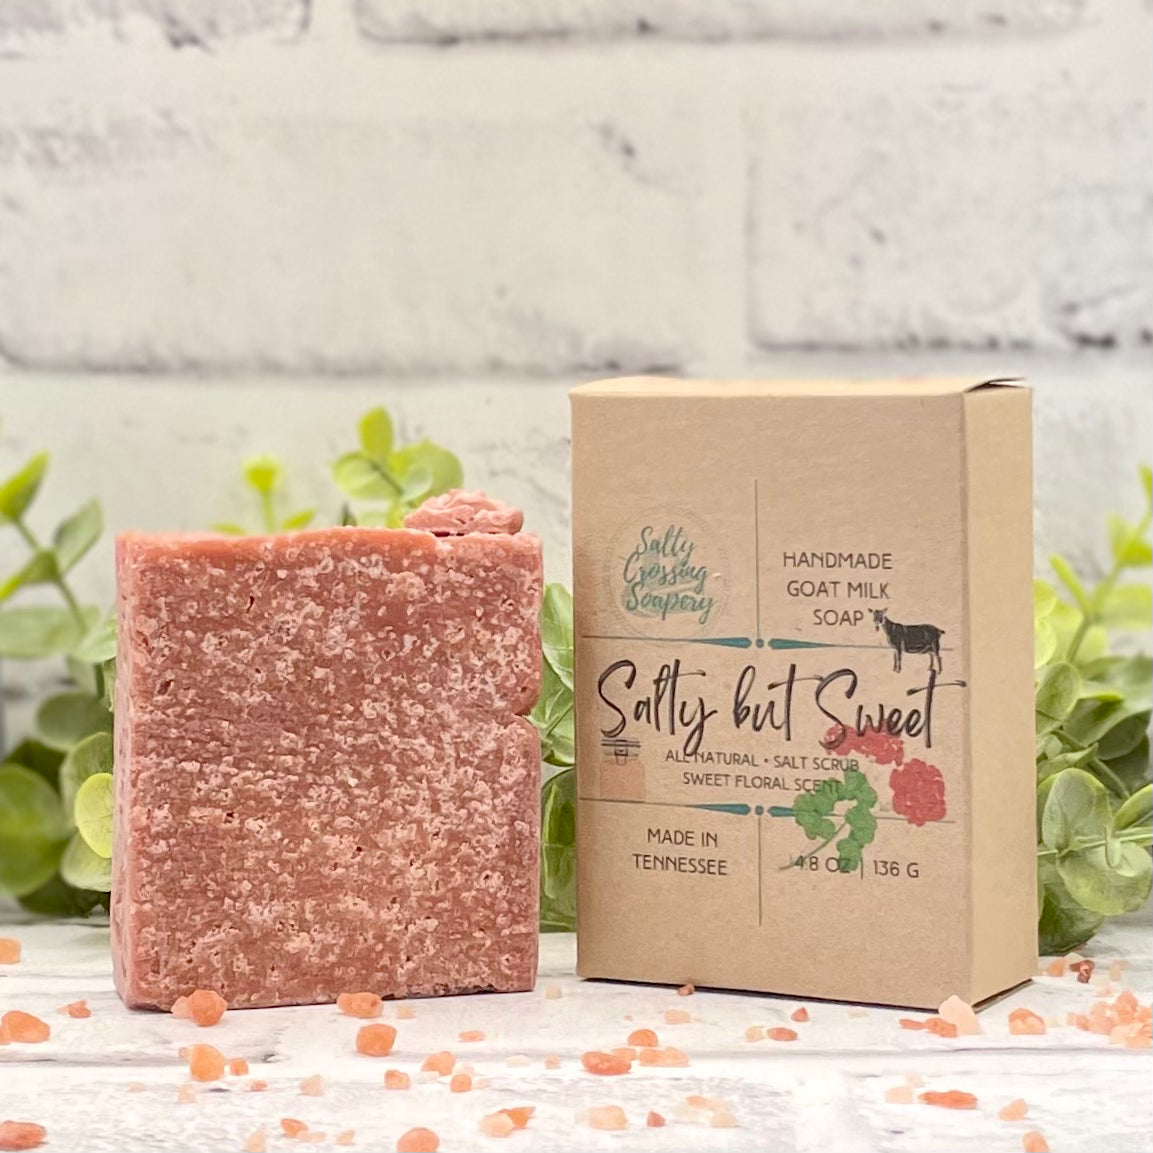 Salty but Sweet soap box with bar of pink salt soap